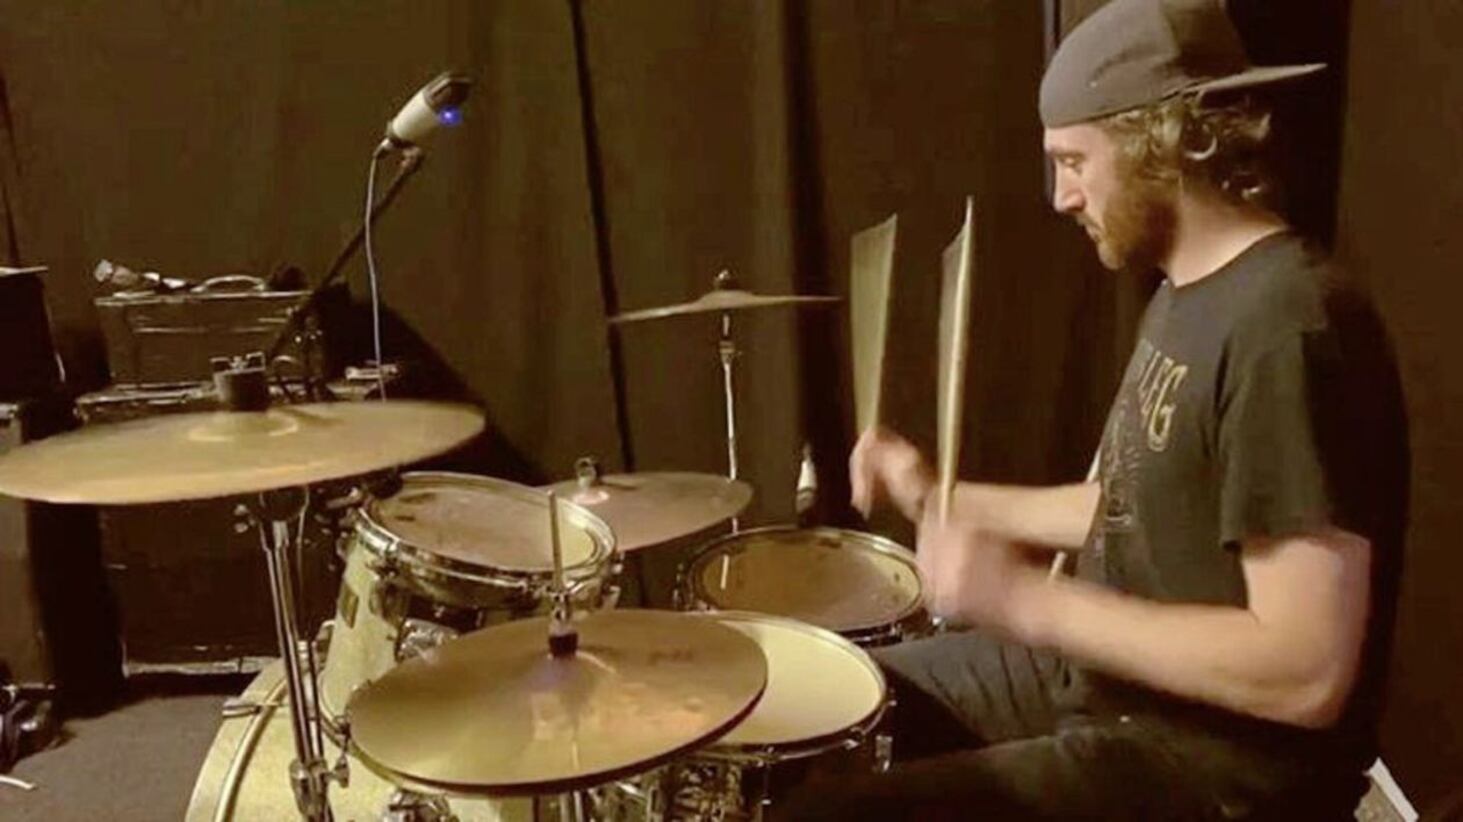 Chris from The Bonnevilles will be live drumming to their second album via YouTube tomorrow night 